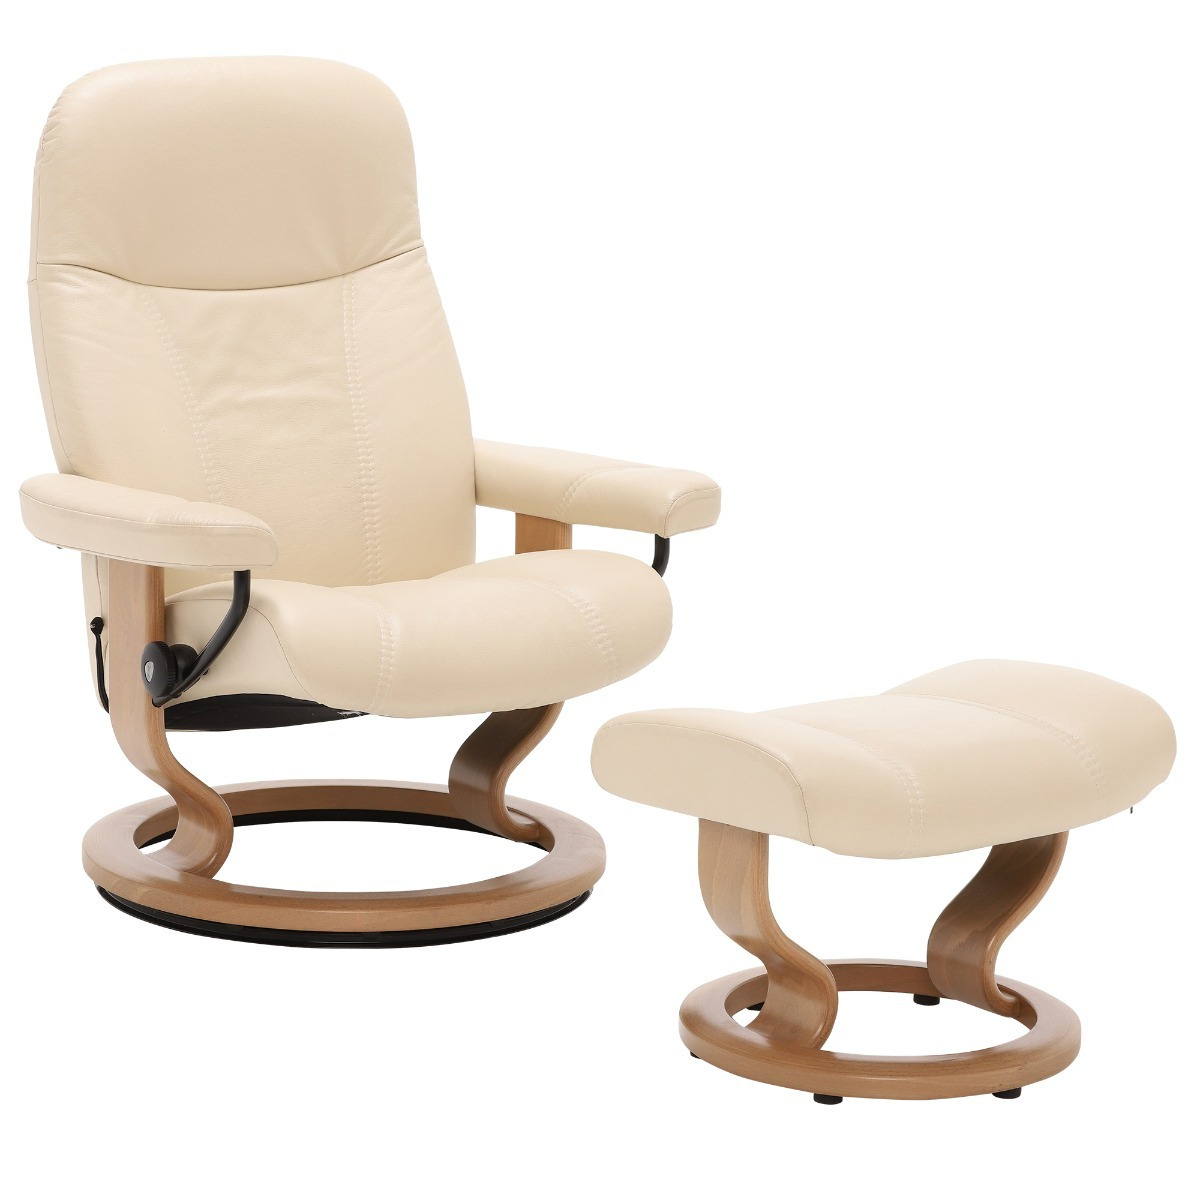 Stressless Consul Small Recliner Chair & Stool, Neutral Leather - Barker & Stonehouse - image 1